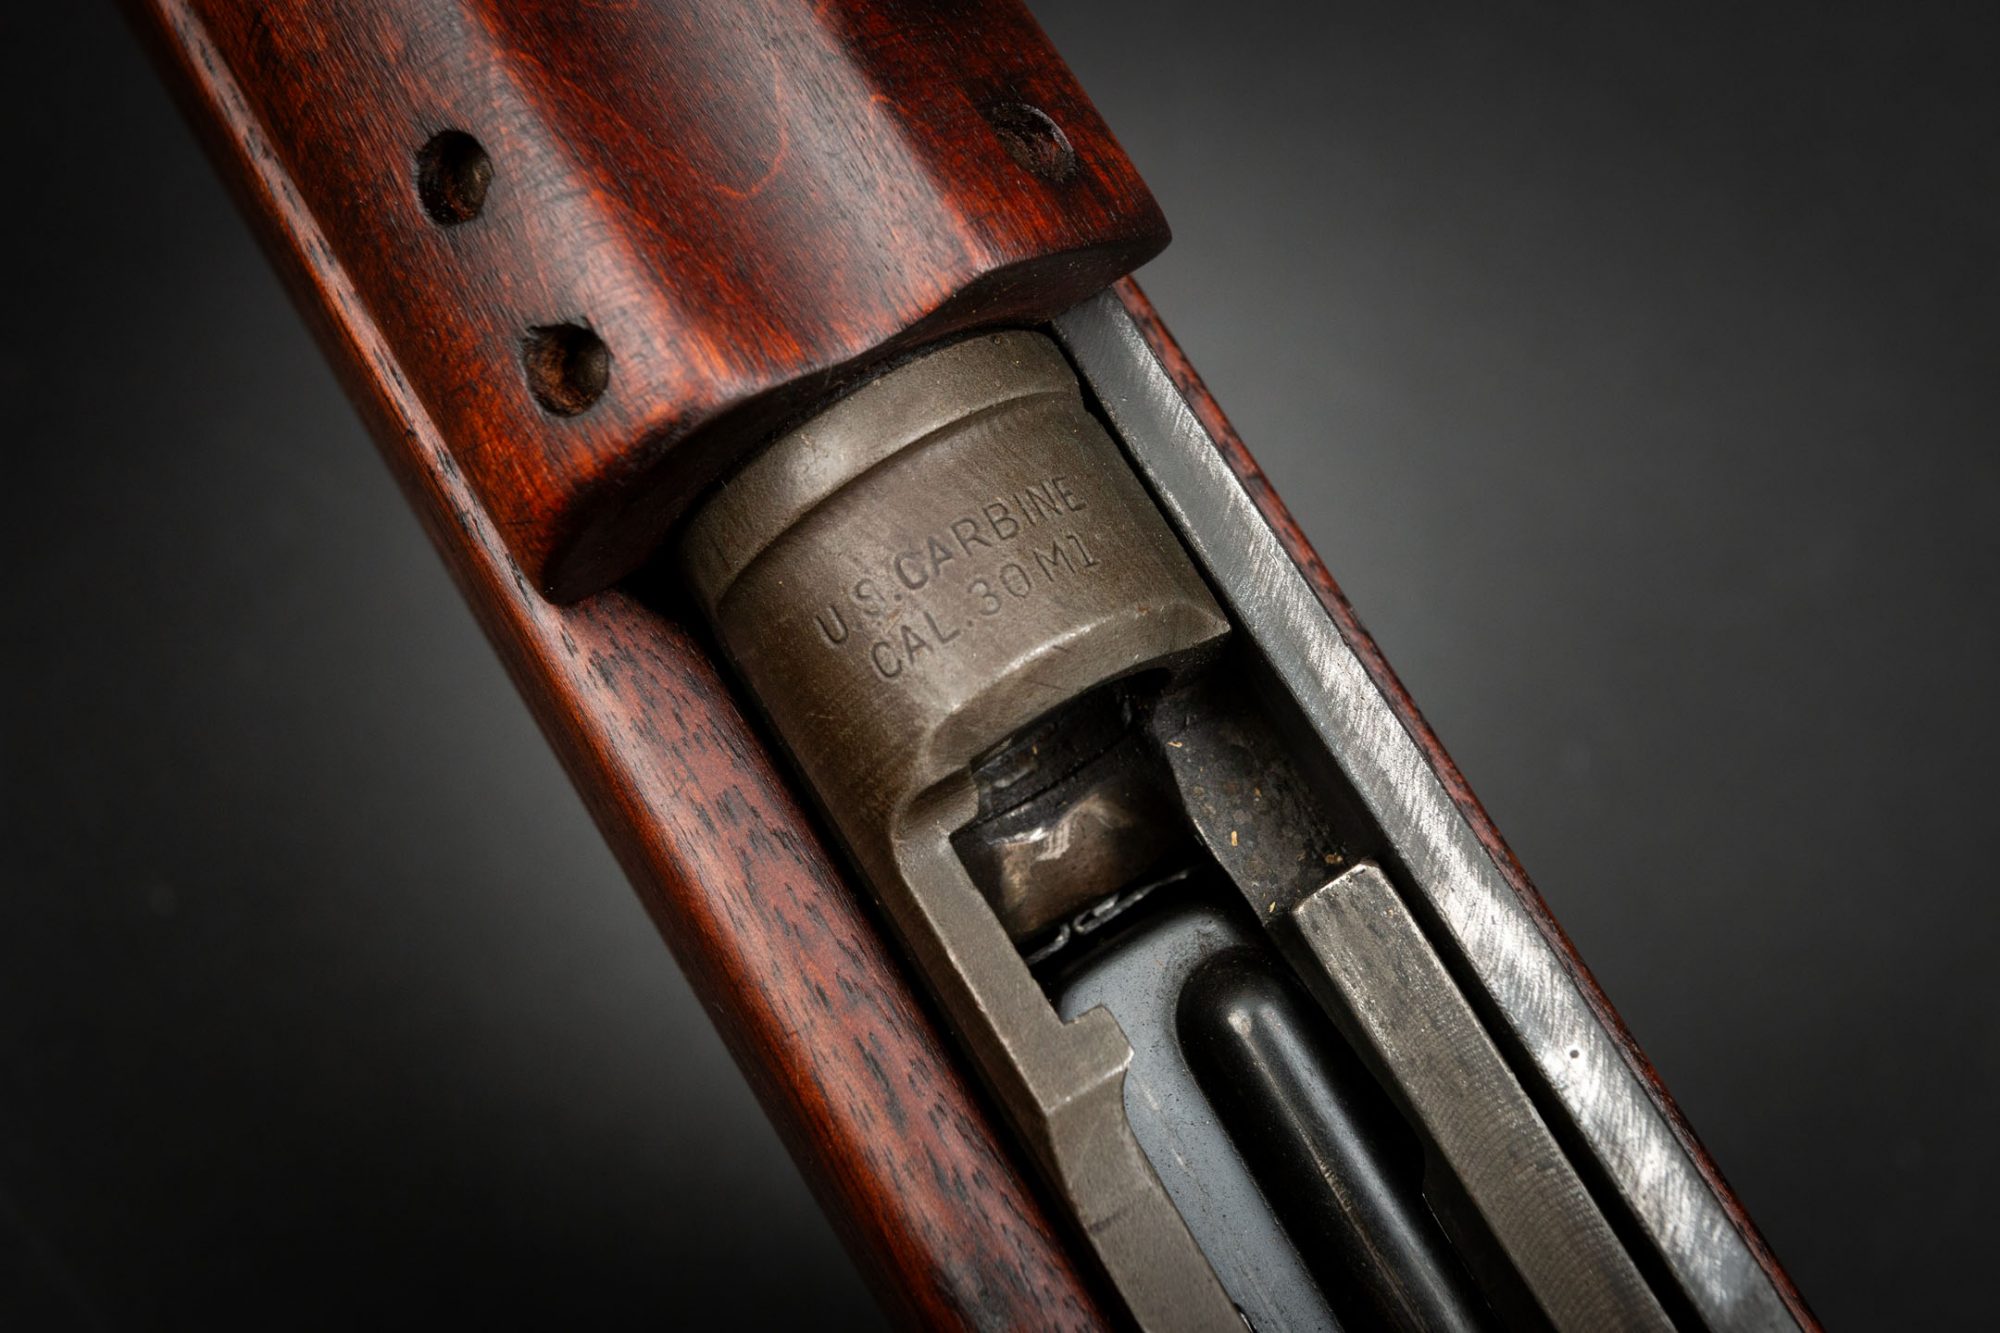 Underwood M1 Carbine in .30 cal, for sale by Turnbull Restoration Co. of Bloomfield, NY